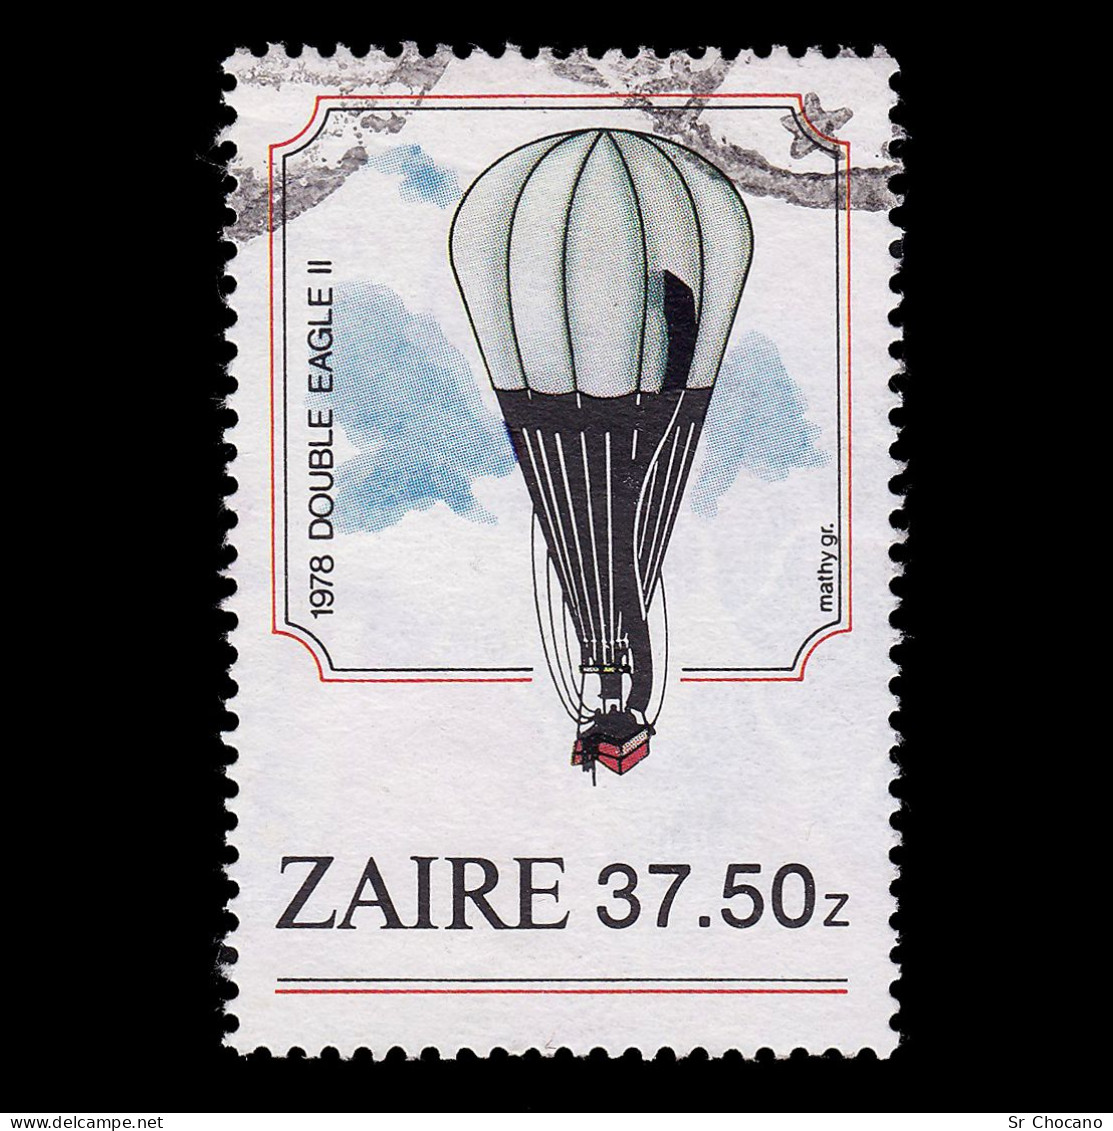 ZAIRE STAMP.1984.Double Eagle II, 37,50k.SCOTT 1166.USED. - Usados